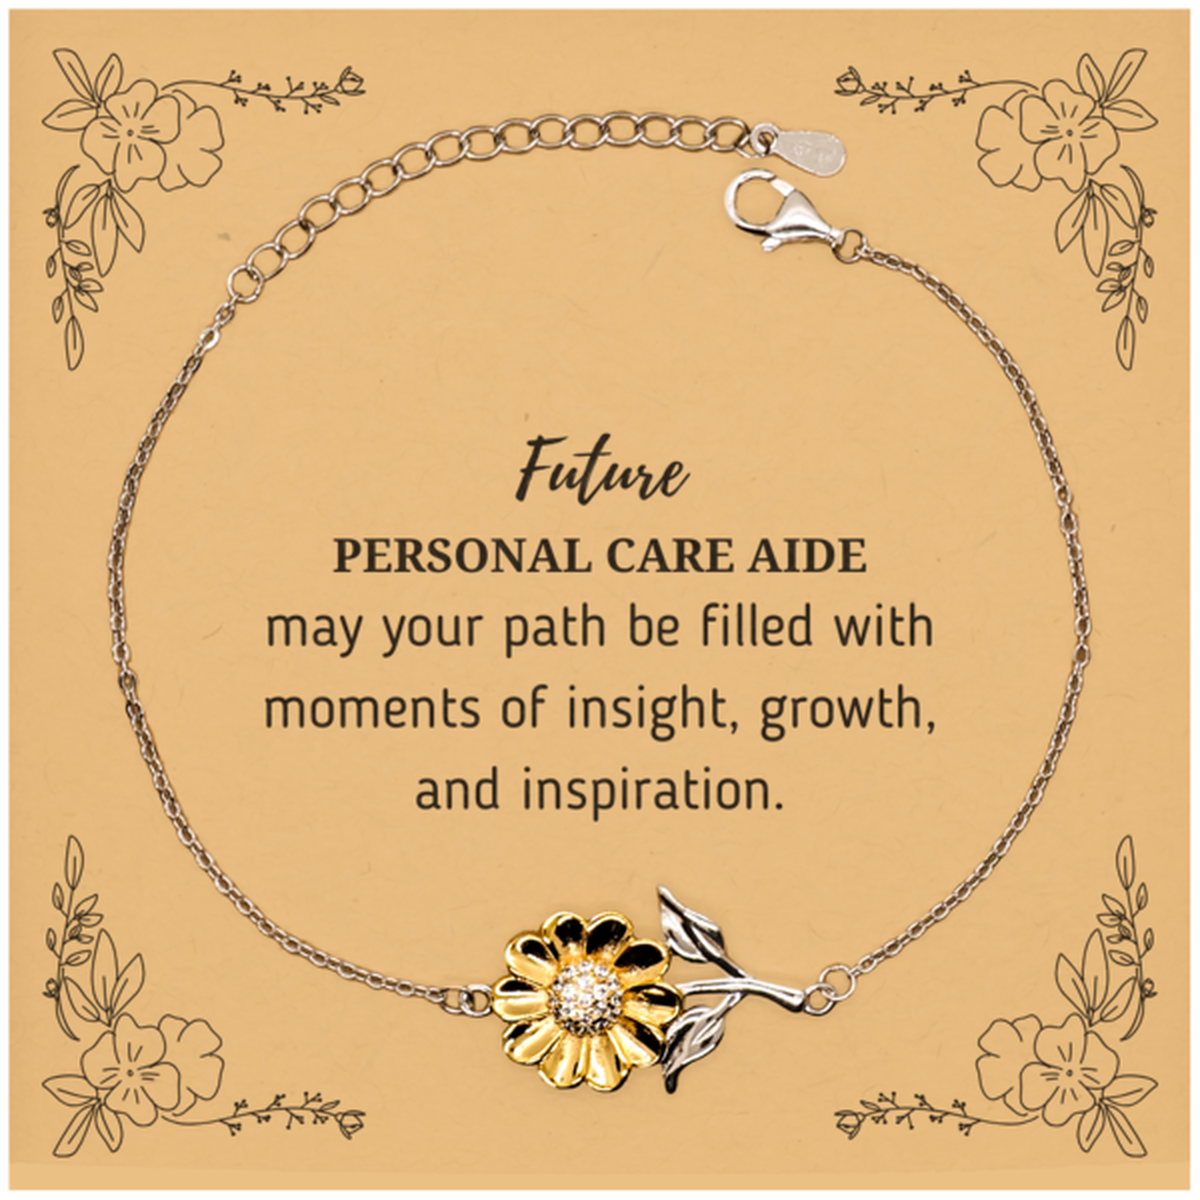 Future Personal Care Aide Gifts, May your path be filled with moments of insight, Graduation Gifts for New Personal Care Aide, Christmas Unique Sunflower Bracelet For Men, Women, Friends